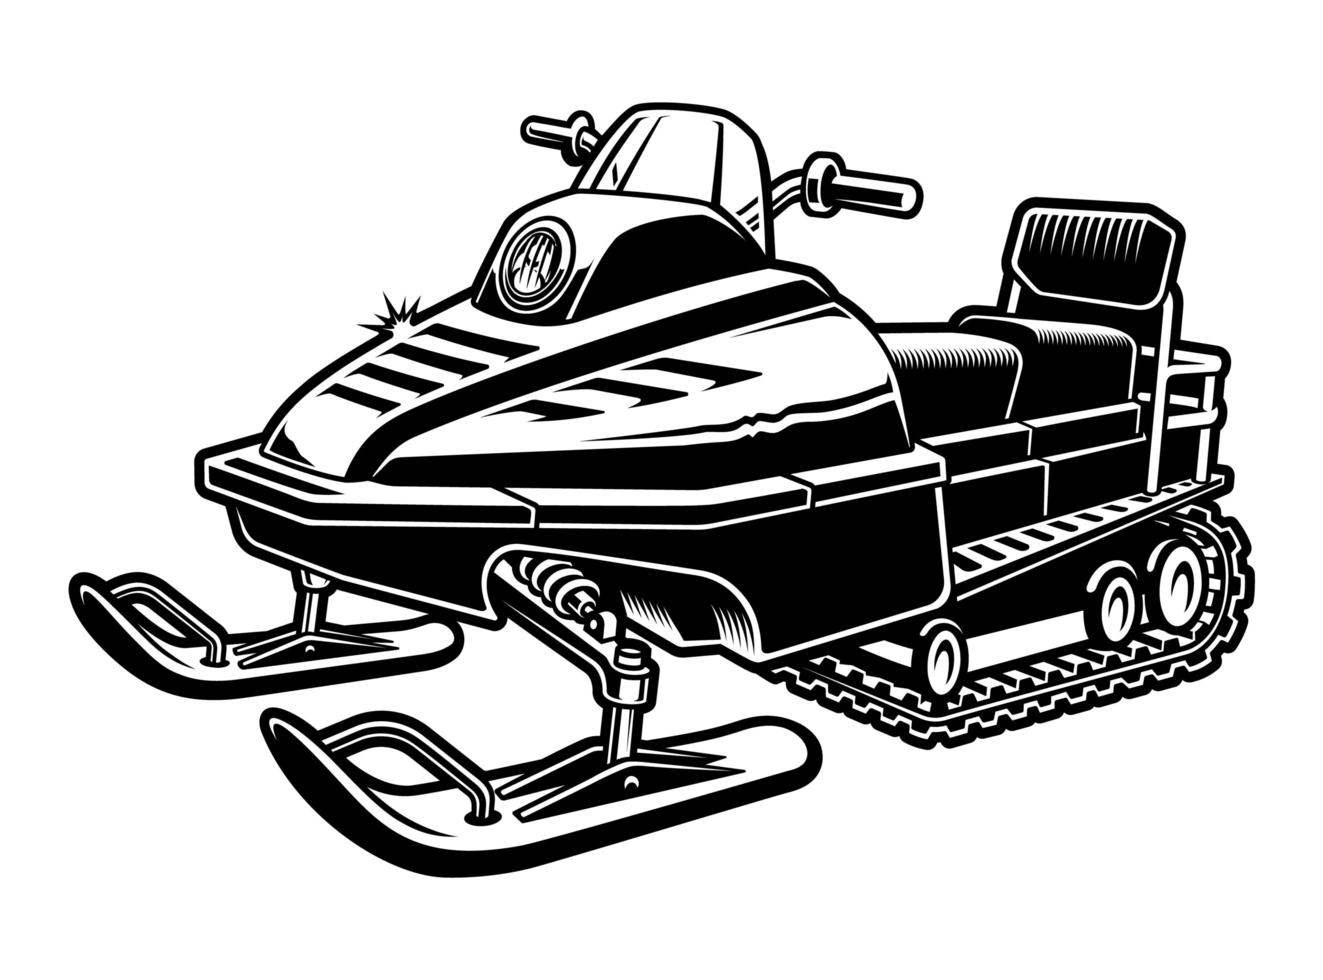 Black and white illustration of a snowmobile vector